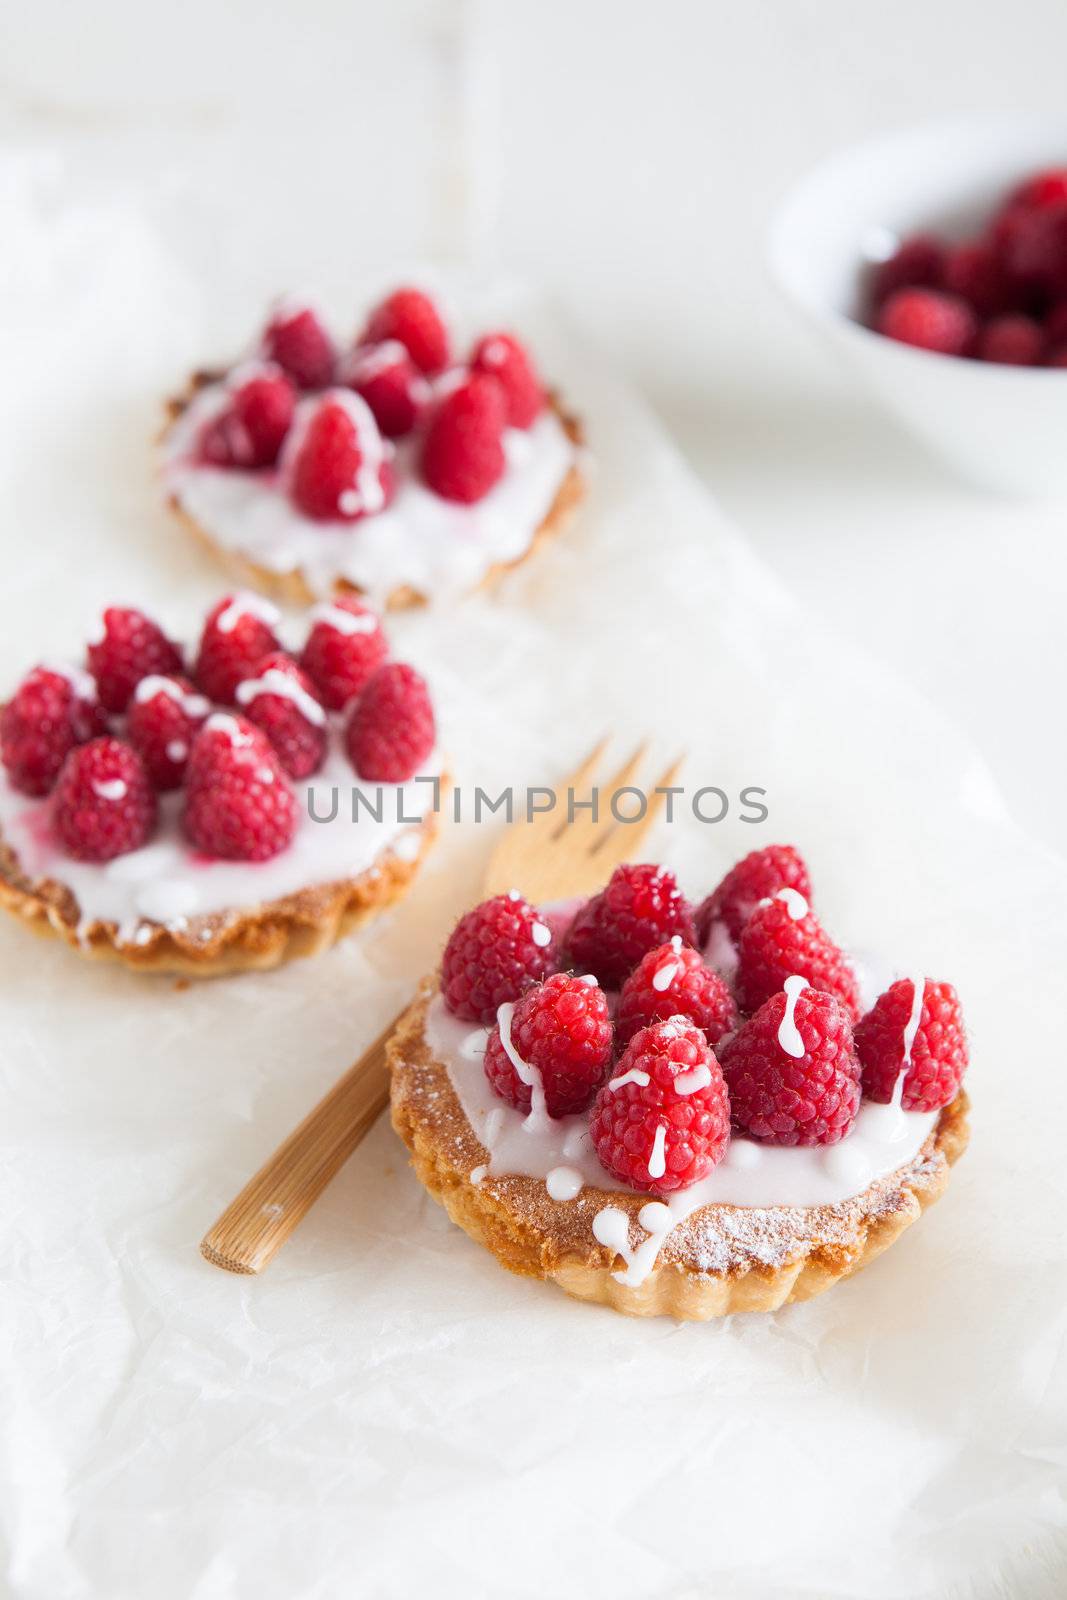 Small raspberry frangipane tarts with icing drizzed over the top